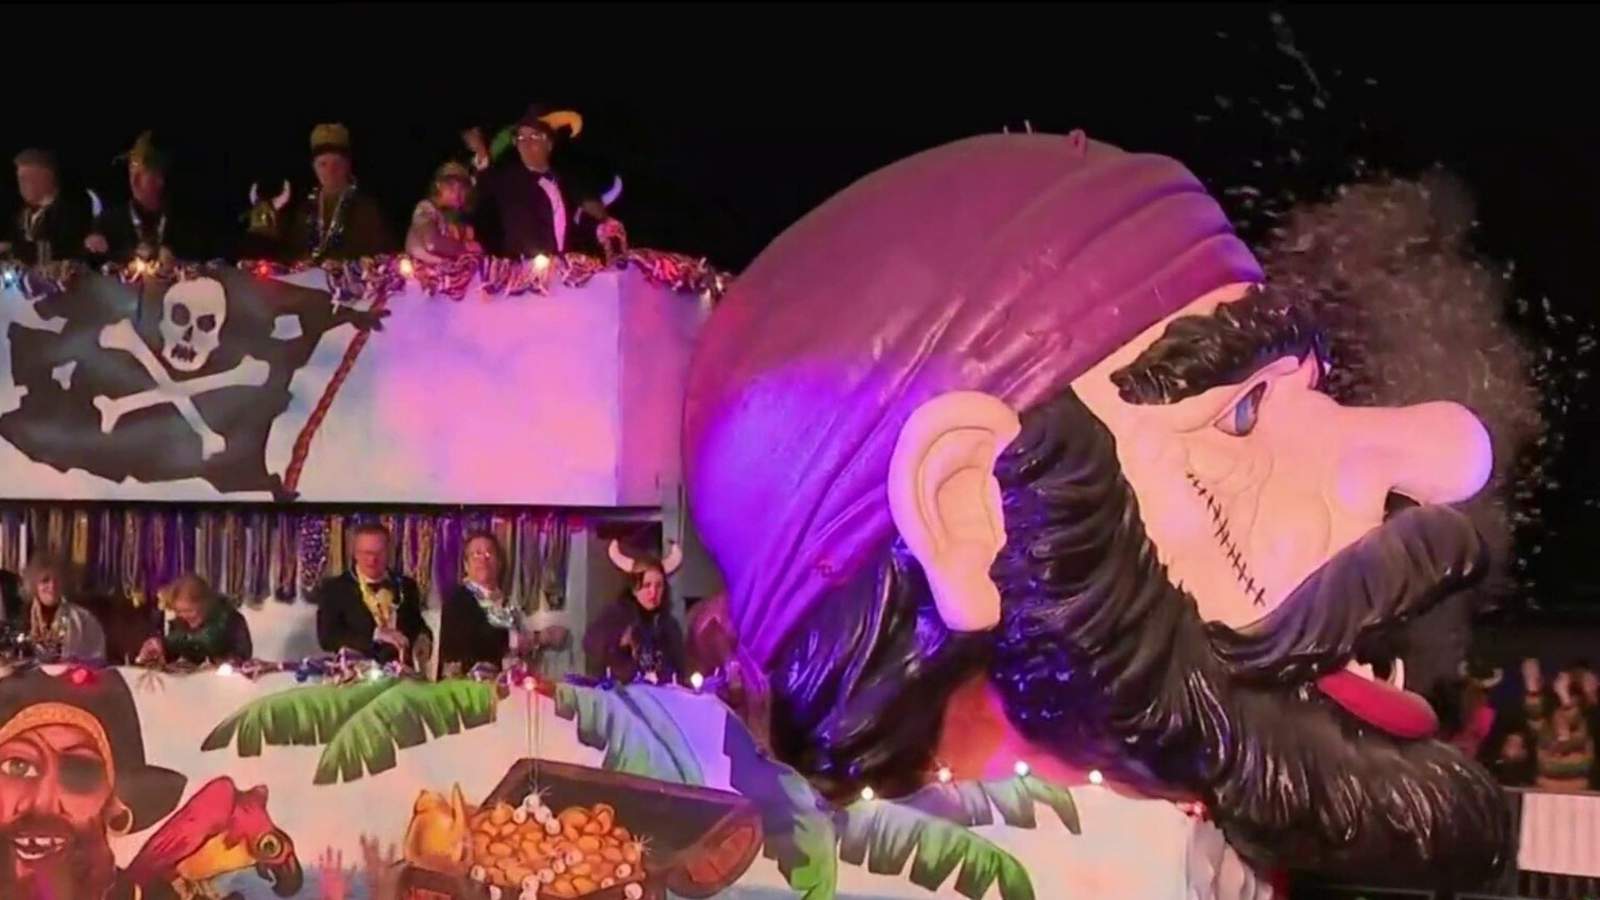 WATCH: The 2020 Knights of Momus Grand Night Parade